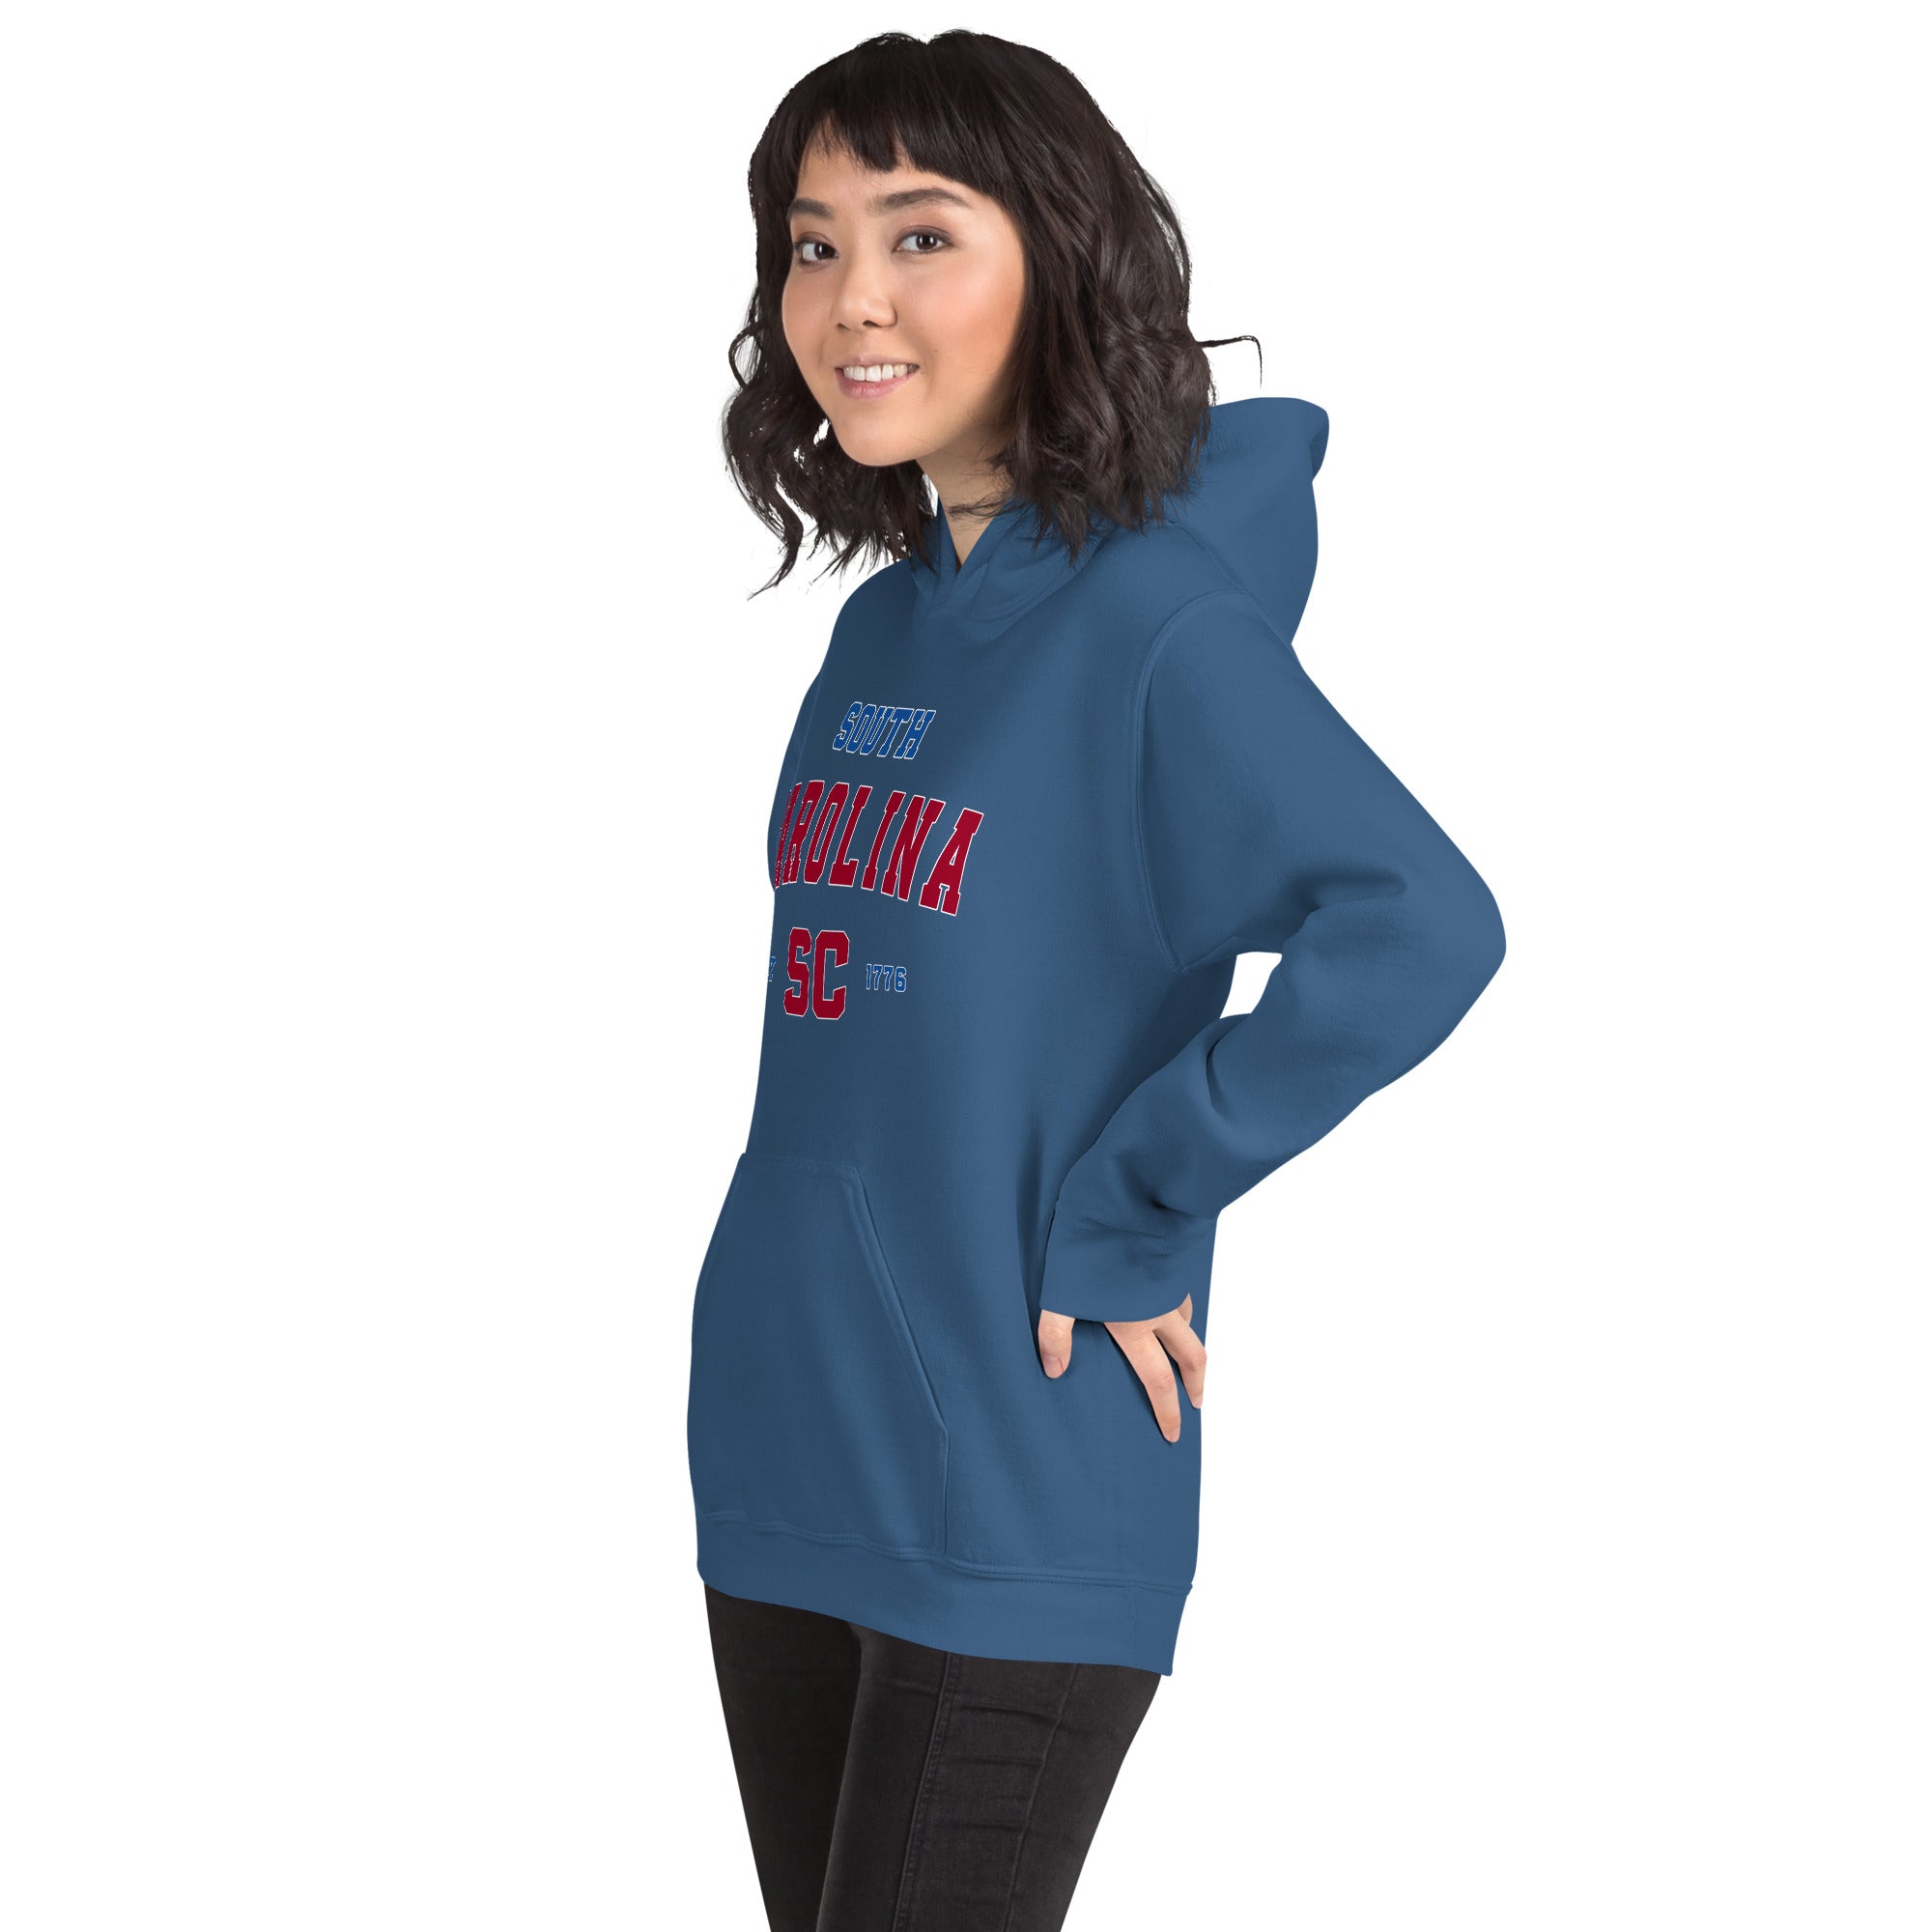 South Carolina Hoodie | SC State One Piece Pullover Hoodie Women